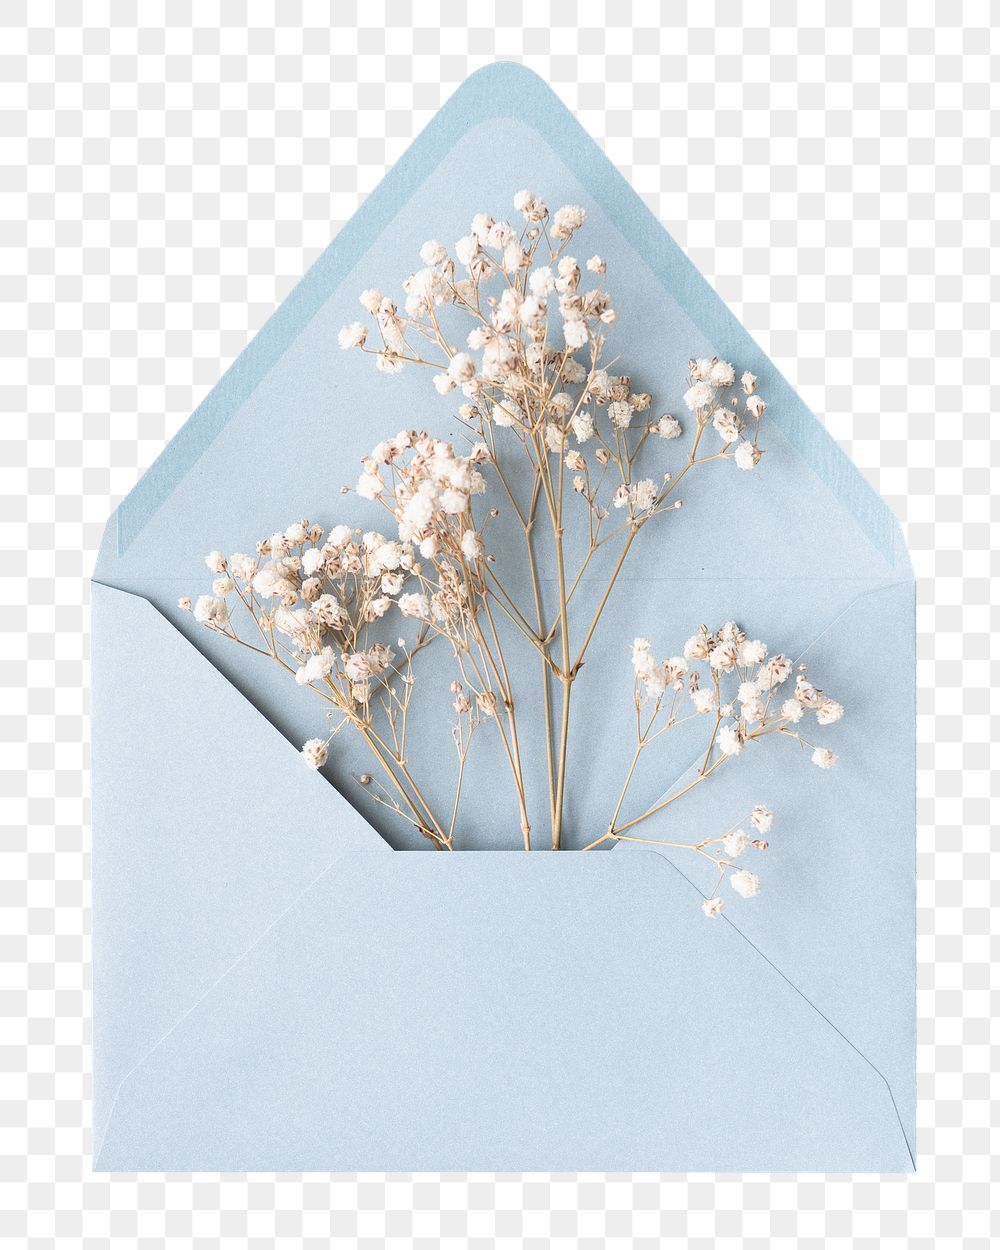 Png blue envelope with flowers sticker isolated image, transparent background